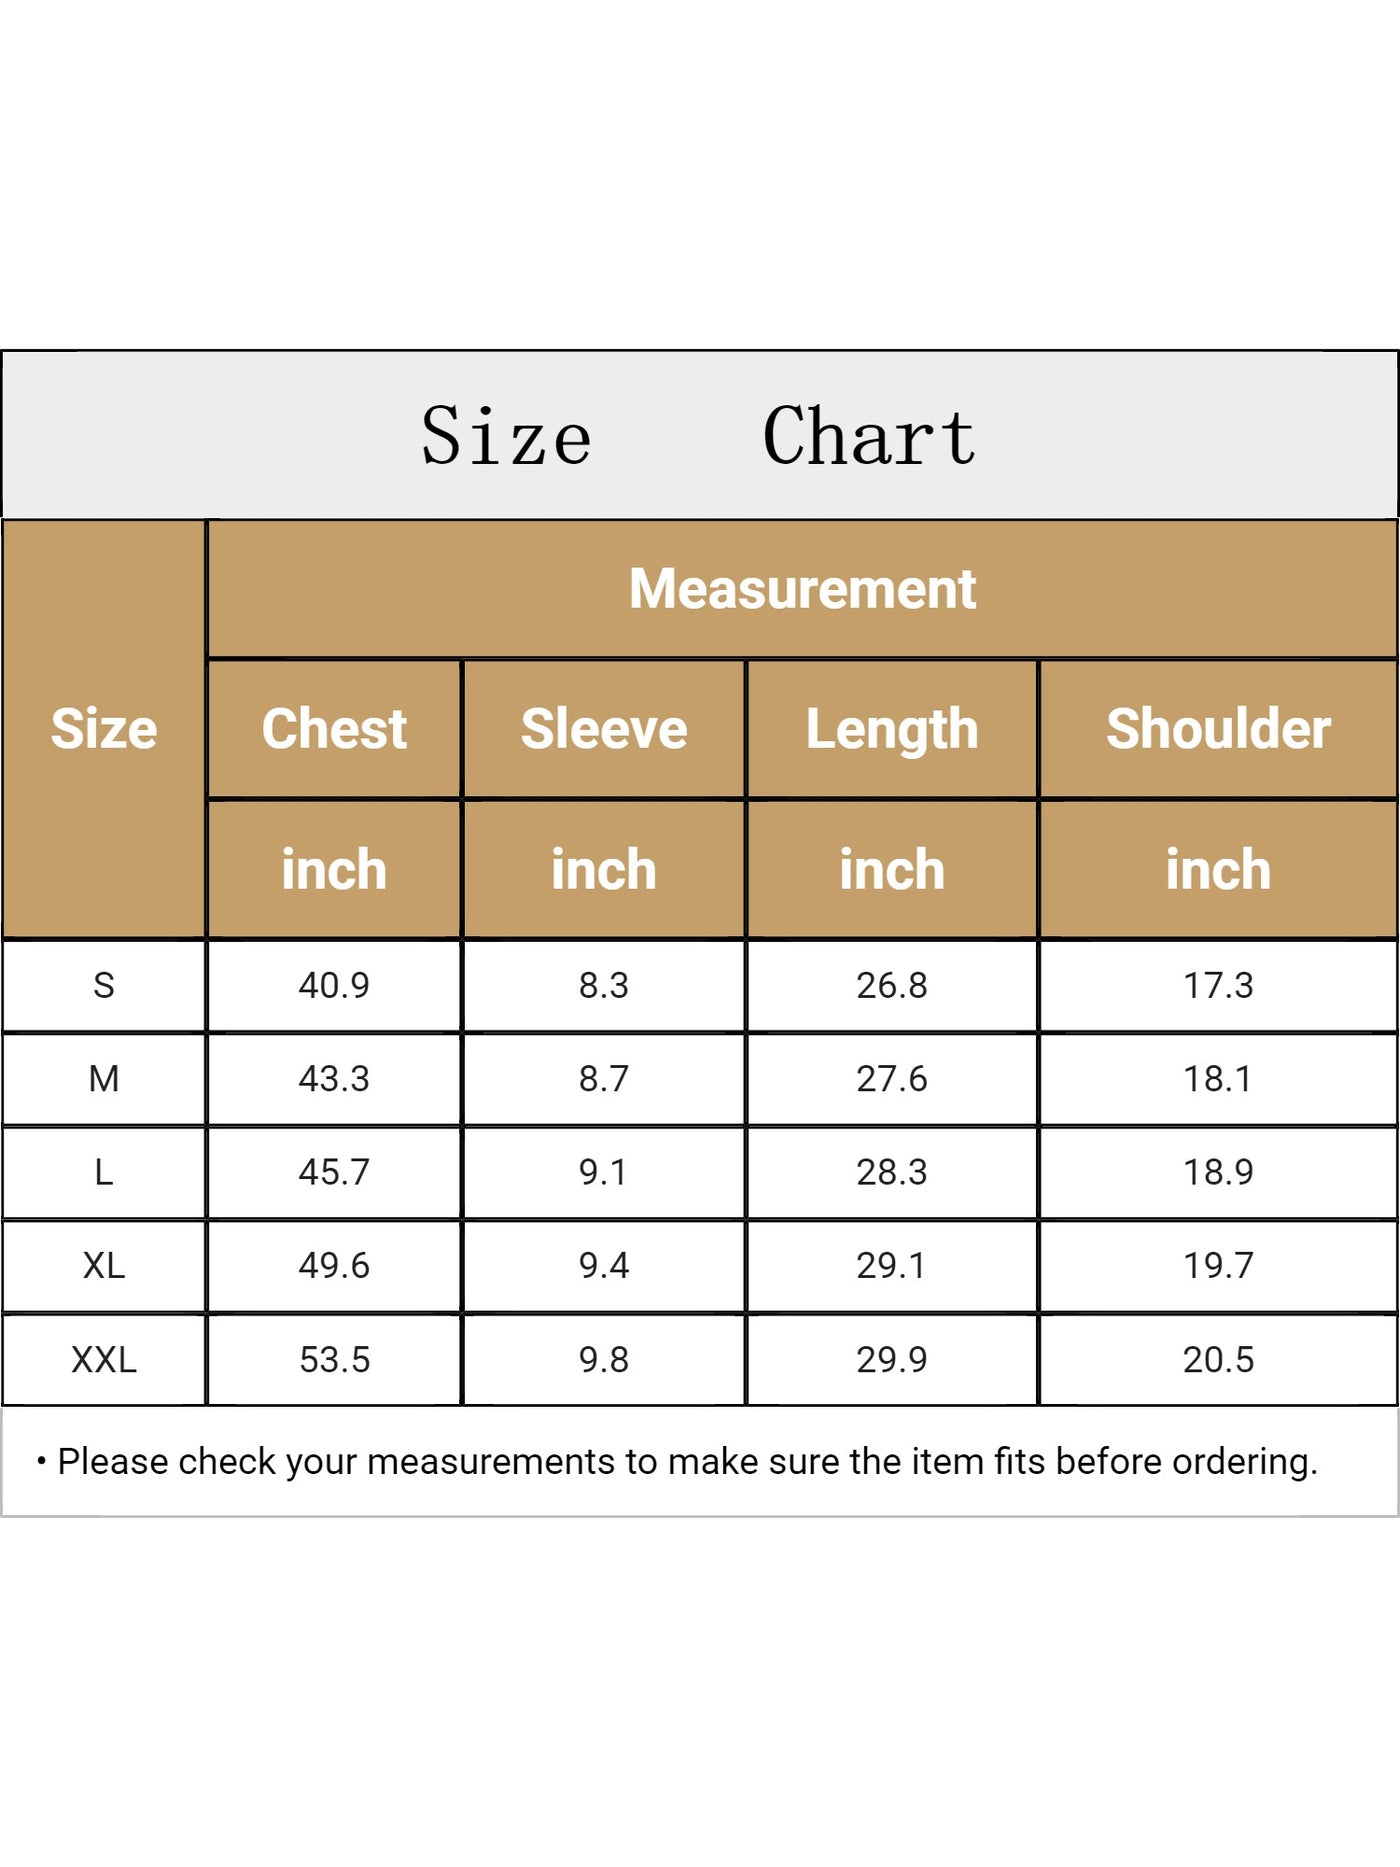 Bublédon Metallic Sparkly Shirts for Men's Crew Neck Short Sleeves Tops Party T-Shirts